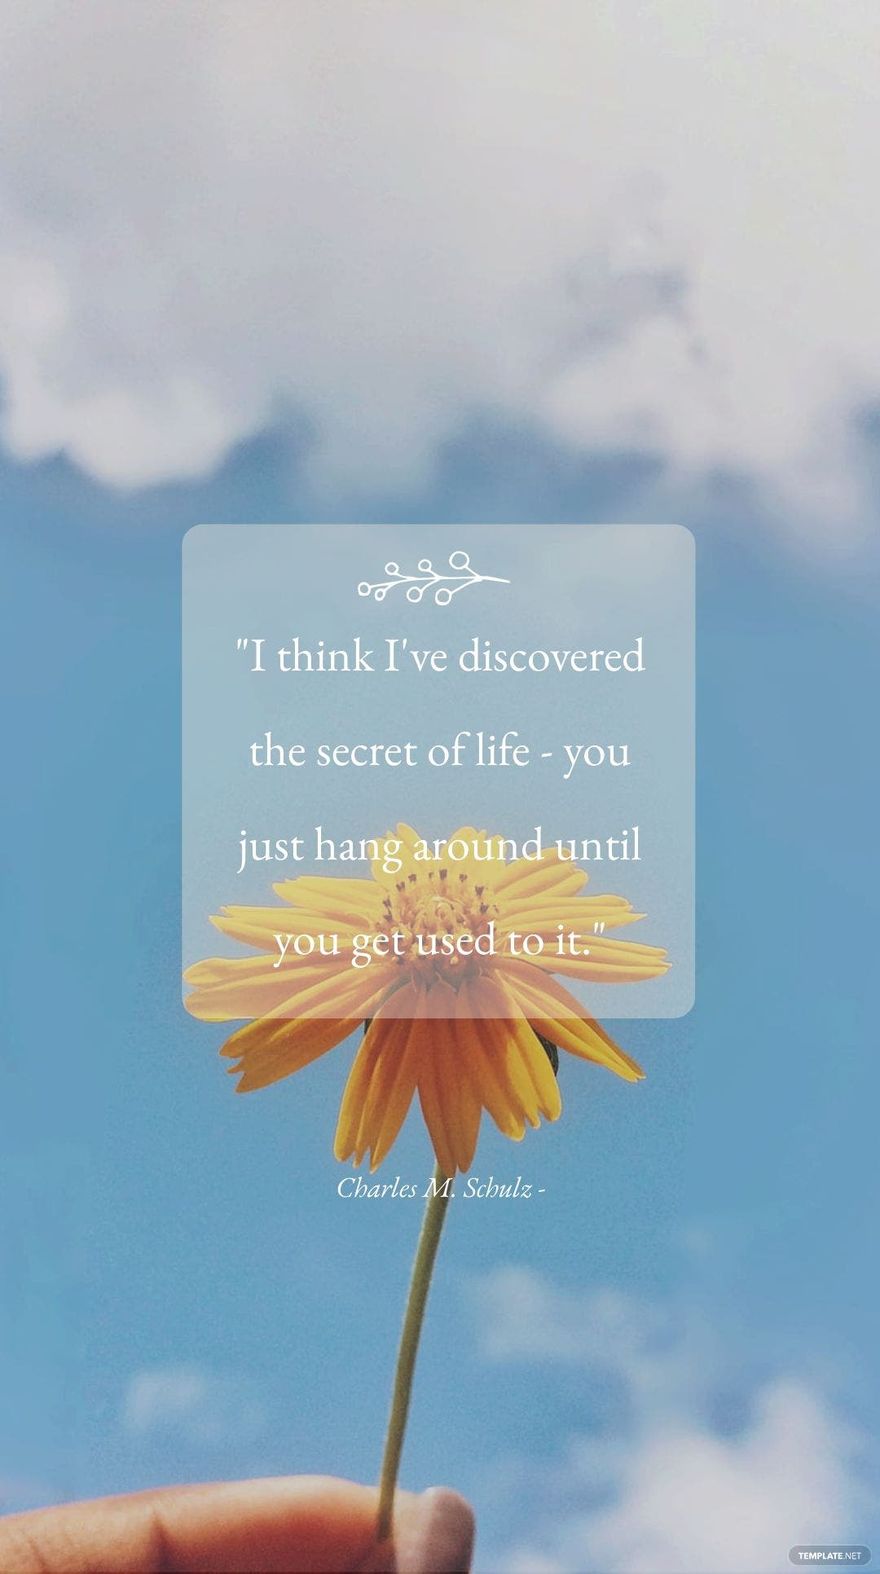 Charles M. Schulz - I think I've discovered the secret of life - you just hang around until you get used to it.